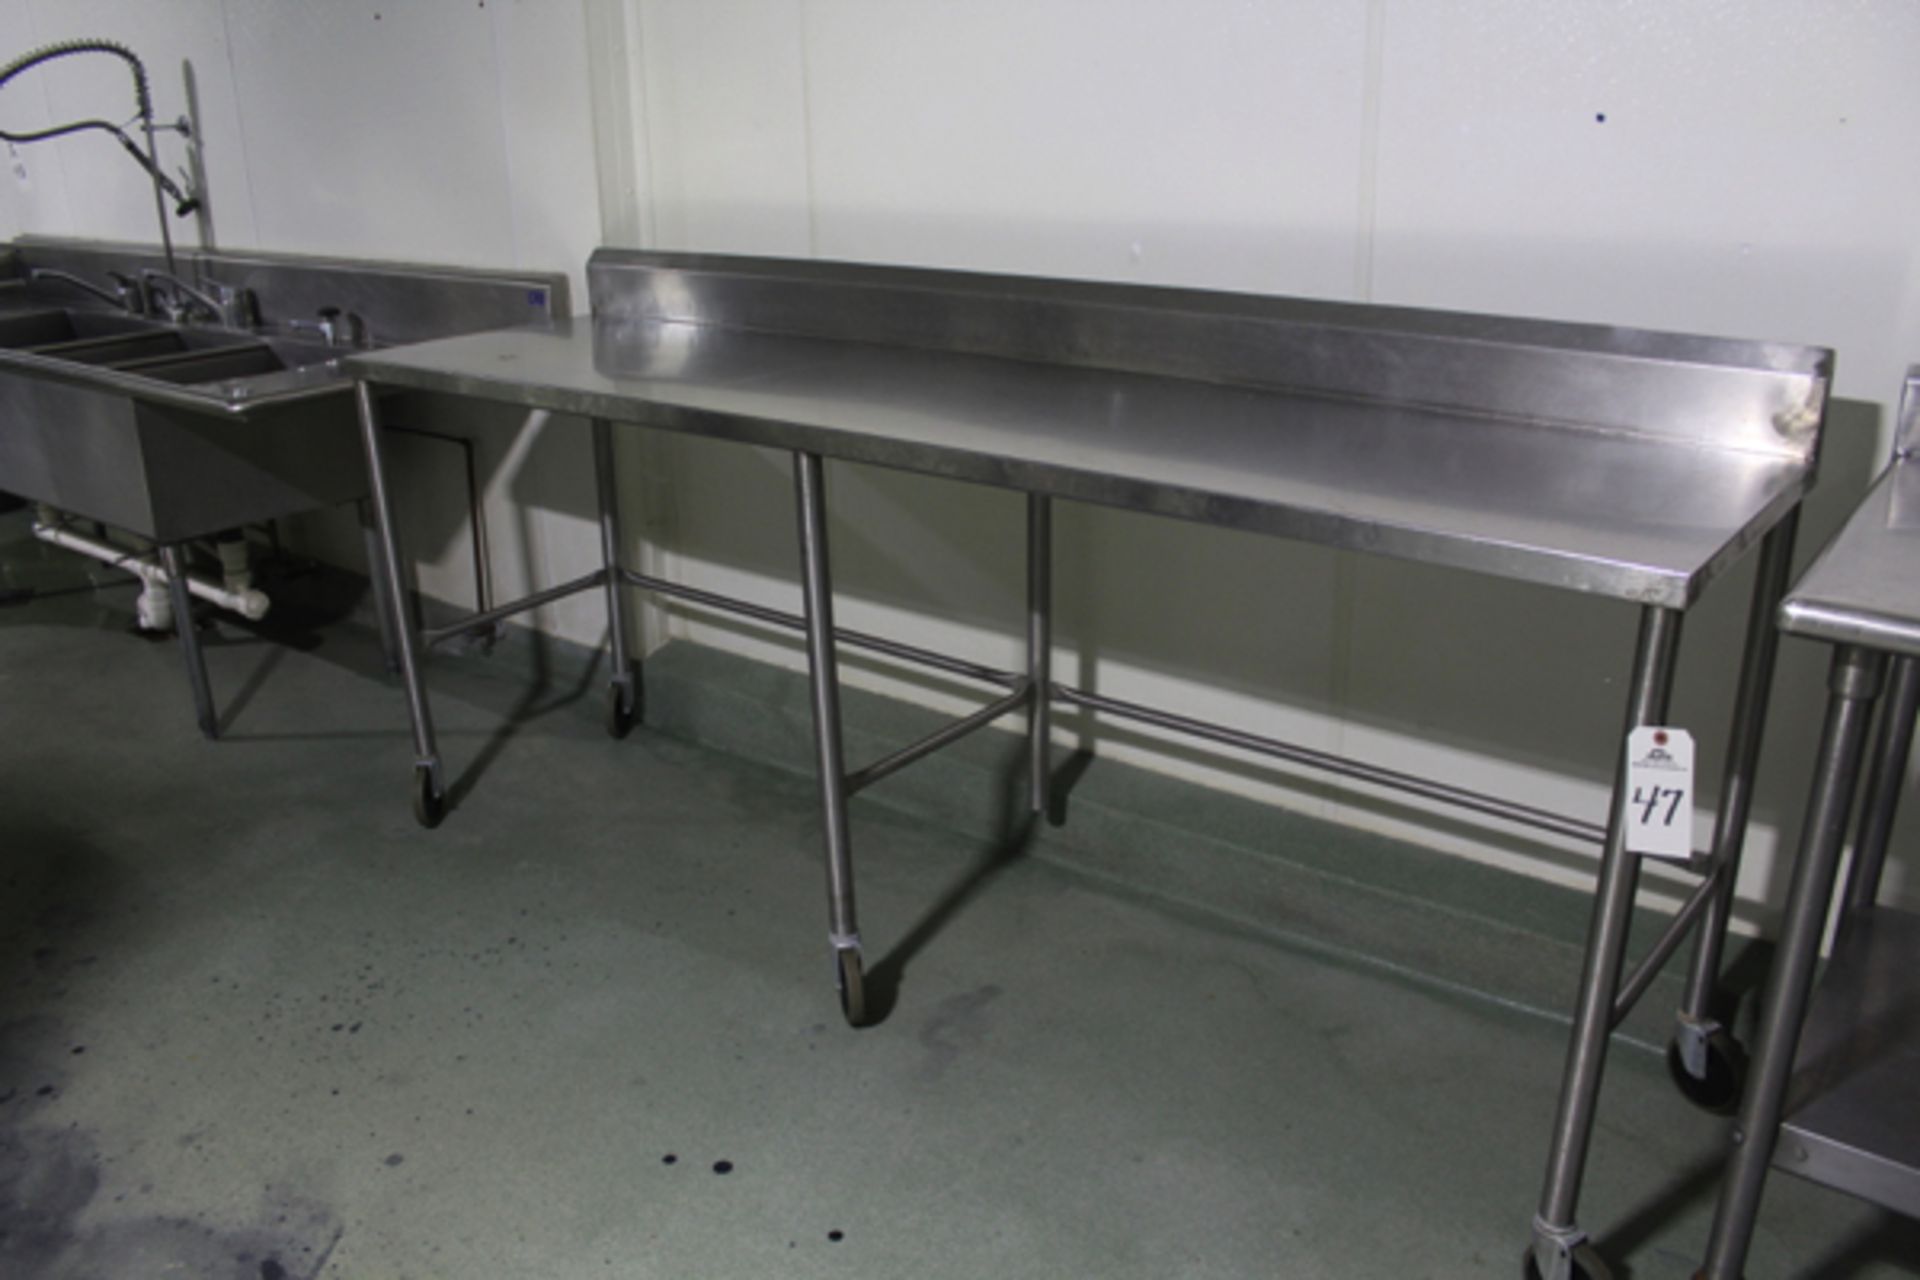 Stainless Steel Prep Table, 25" x 8' | Loading Price: $50 Or Buyer May Hand Carry By February 3rd,